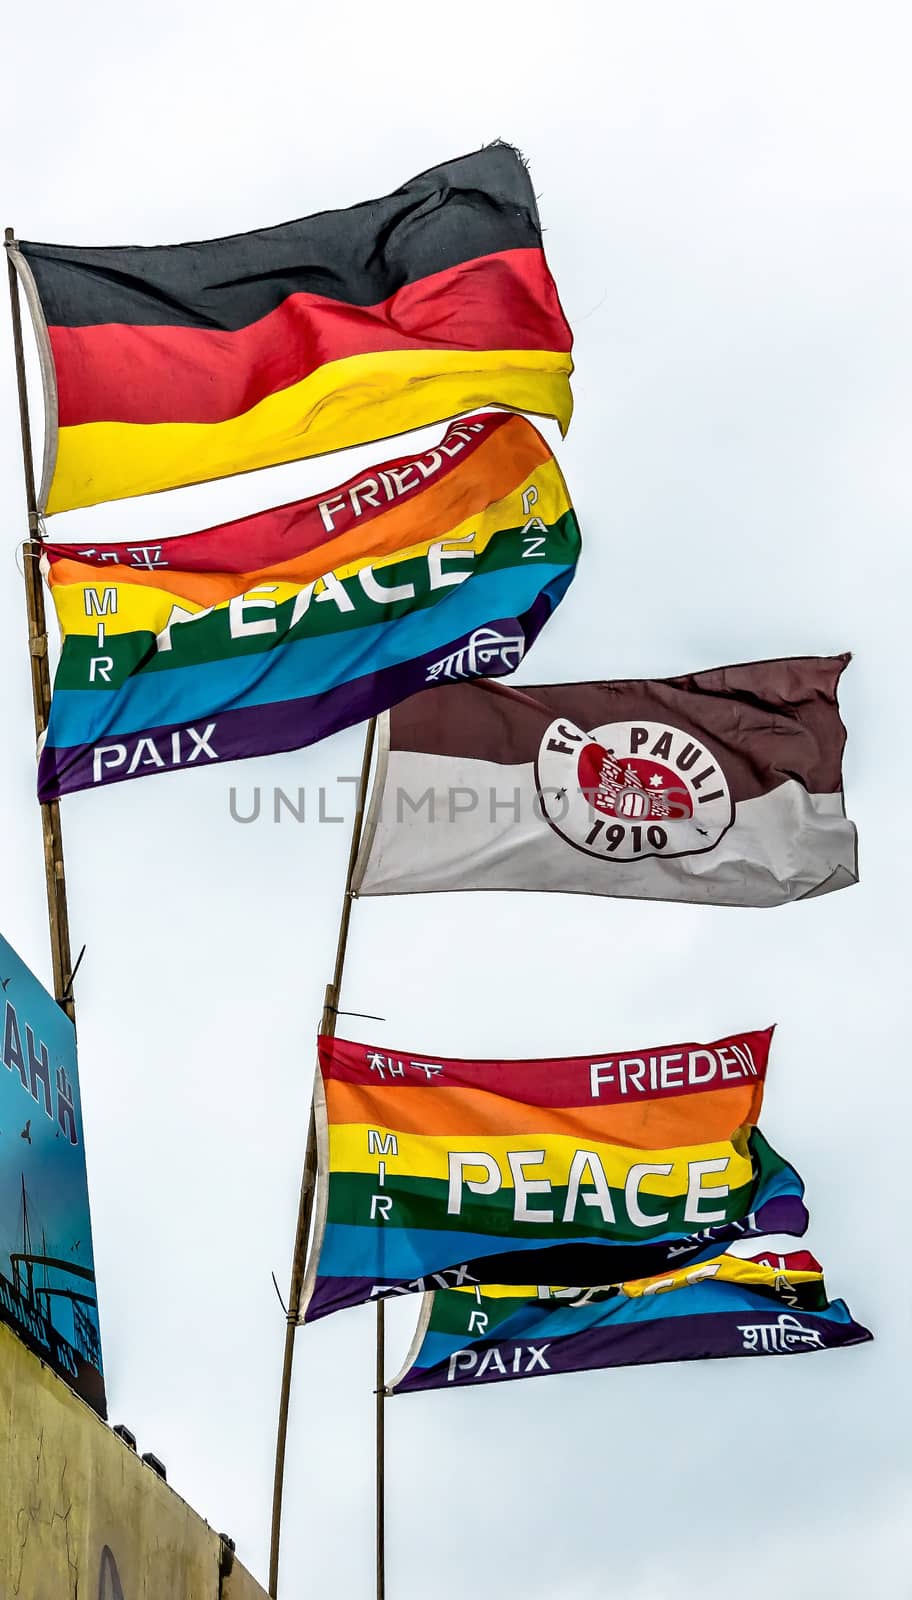 Hamburg, Germany, December 10th 2017: Flags of the soccer club FC St. Pauli and the colorful peace flag blow in the wind at the harbour.